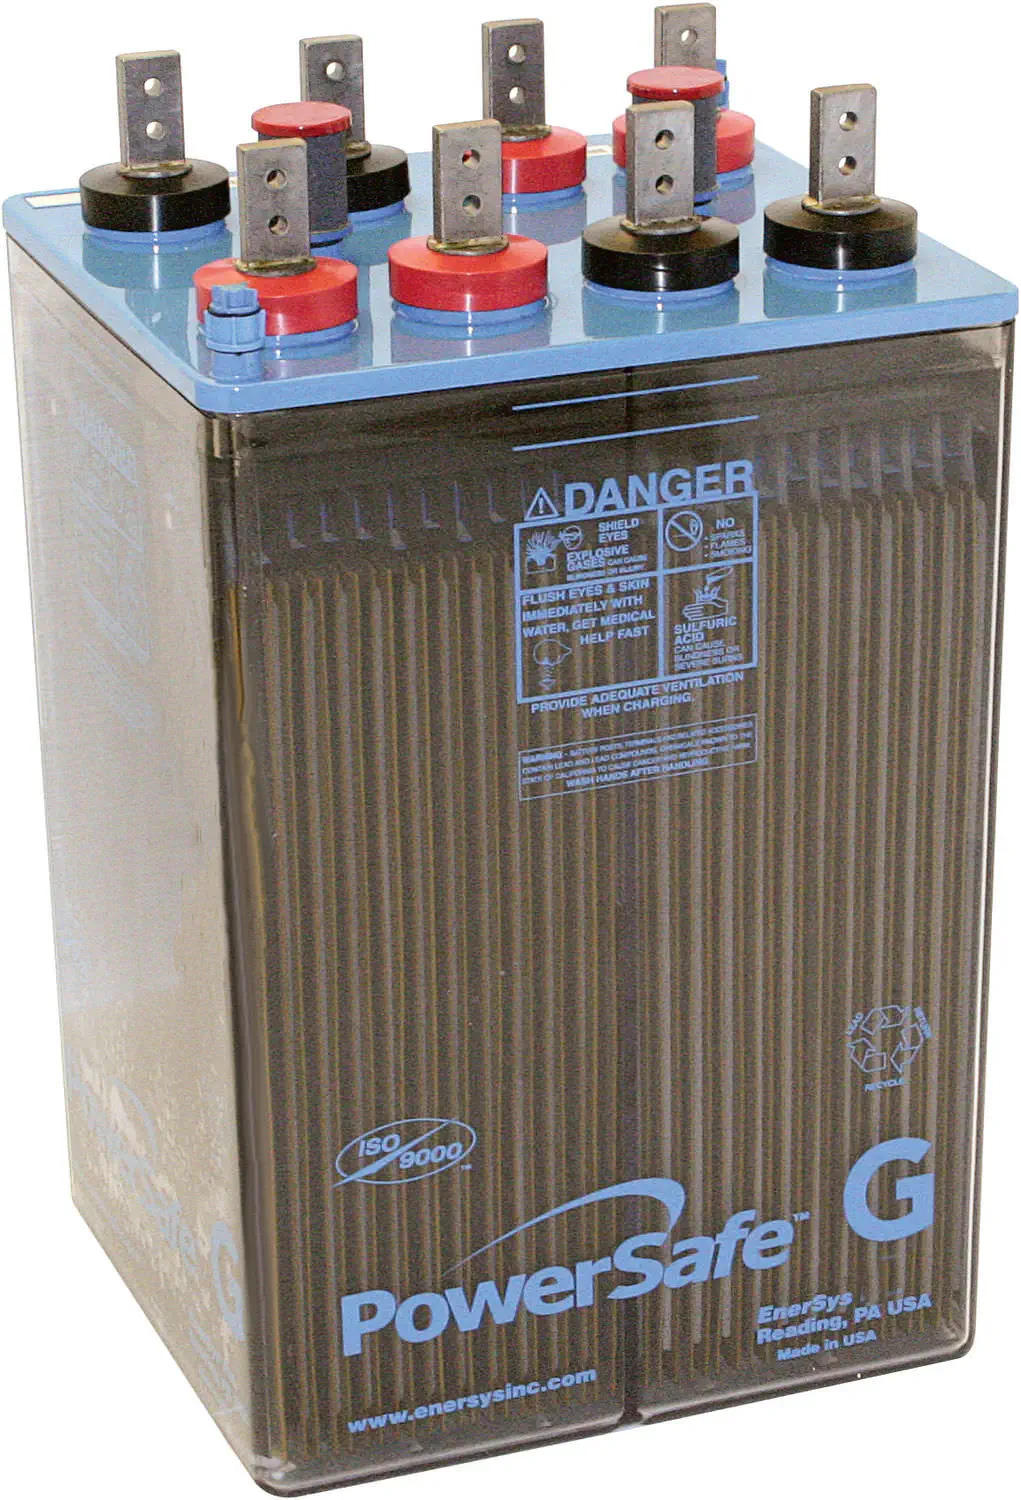 EnerSys PowerSafe GN-37